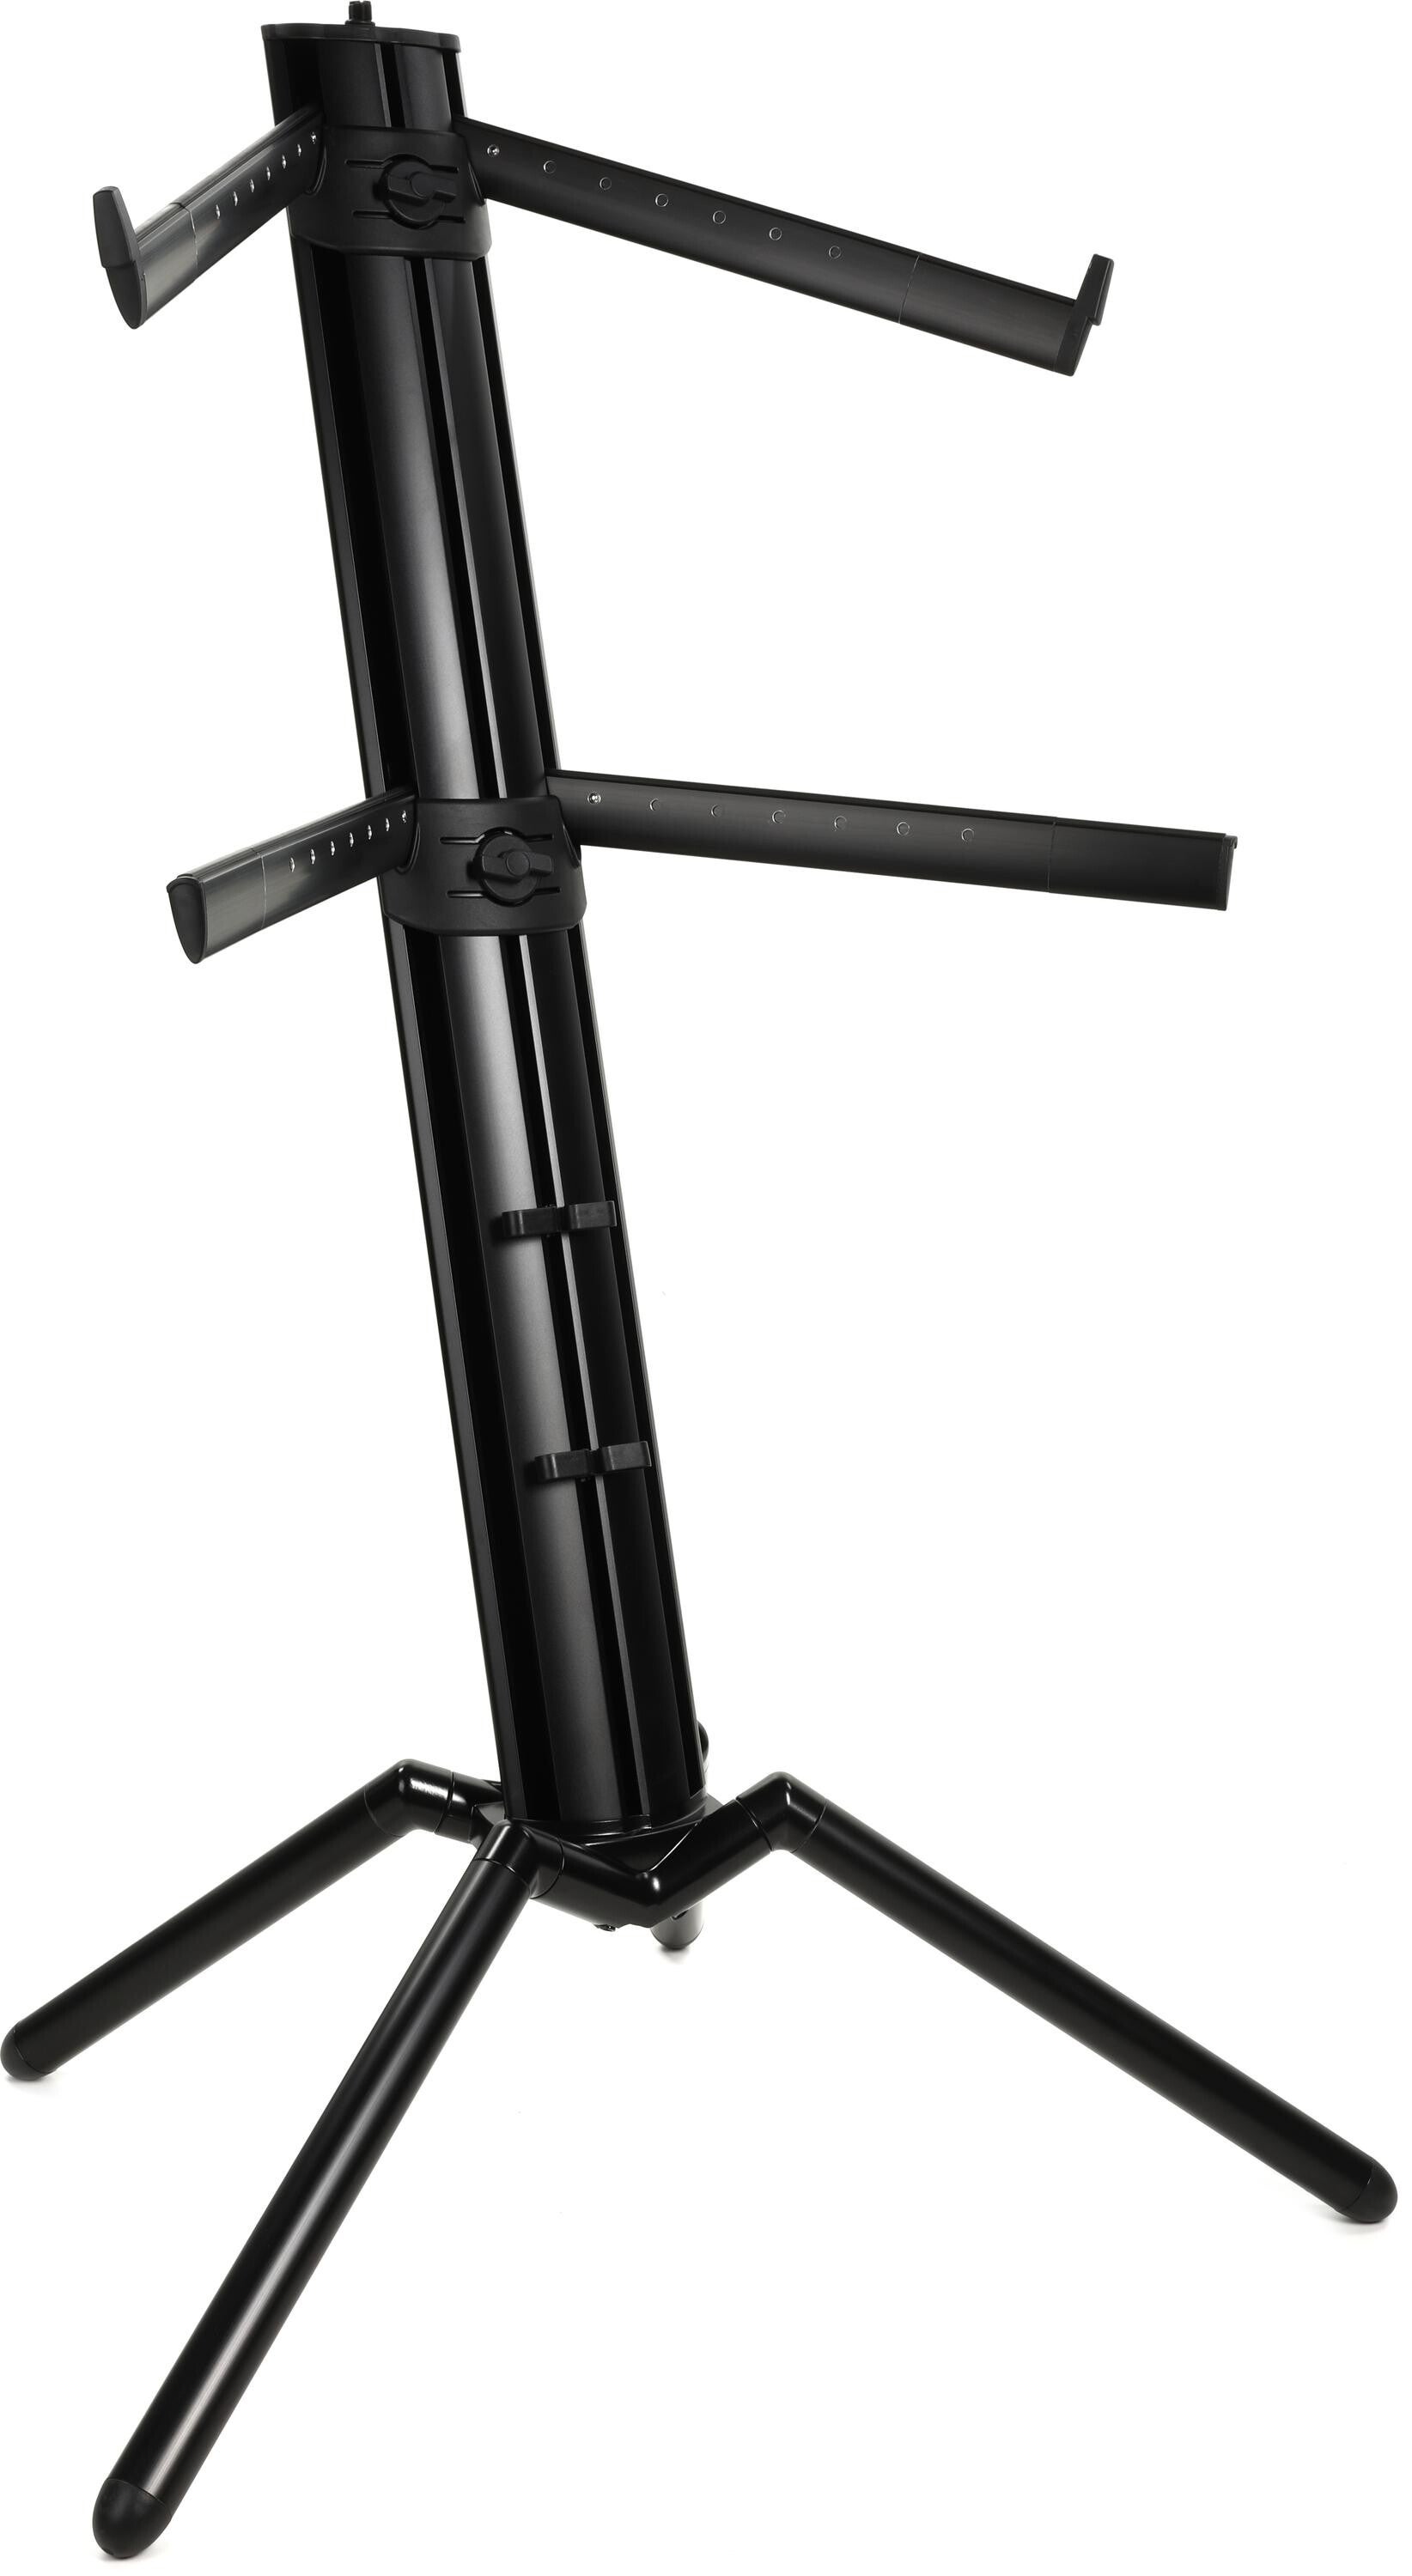 K&M 18860 Spider Pro Keyboard Stand - Black | Sweetwater